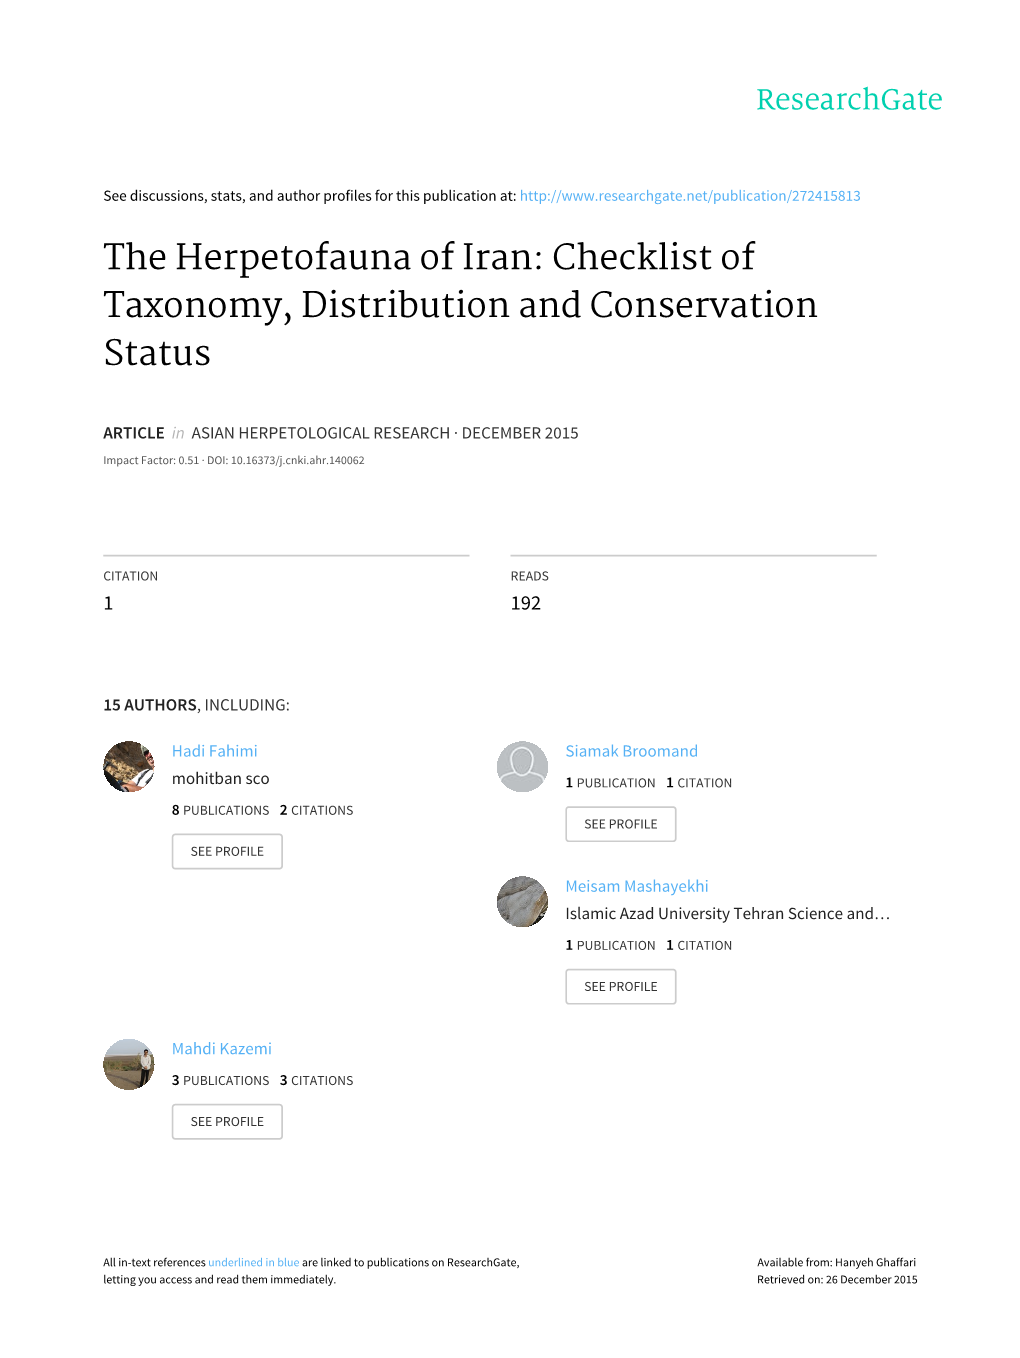 The Herpetofauna of Iran: Checklist of Taxonomy, Distribution and Conservation Status